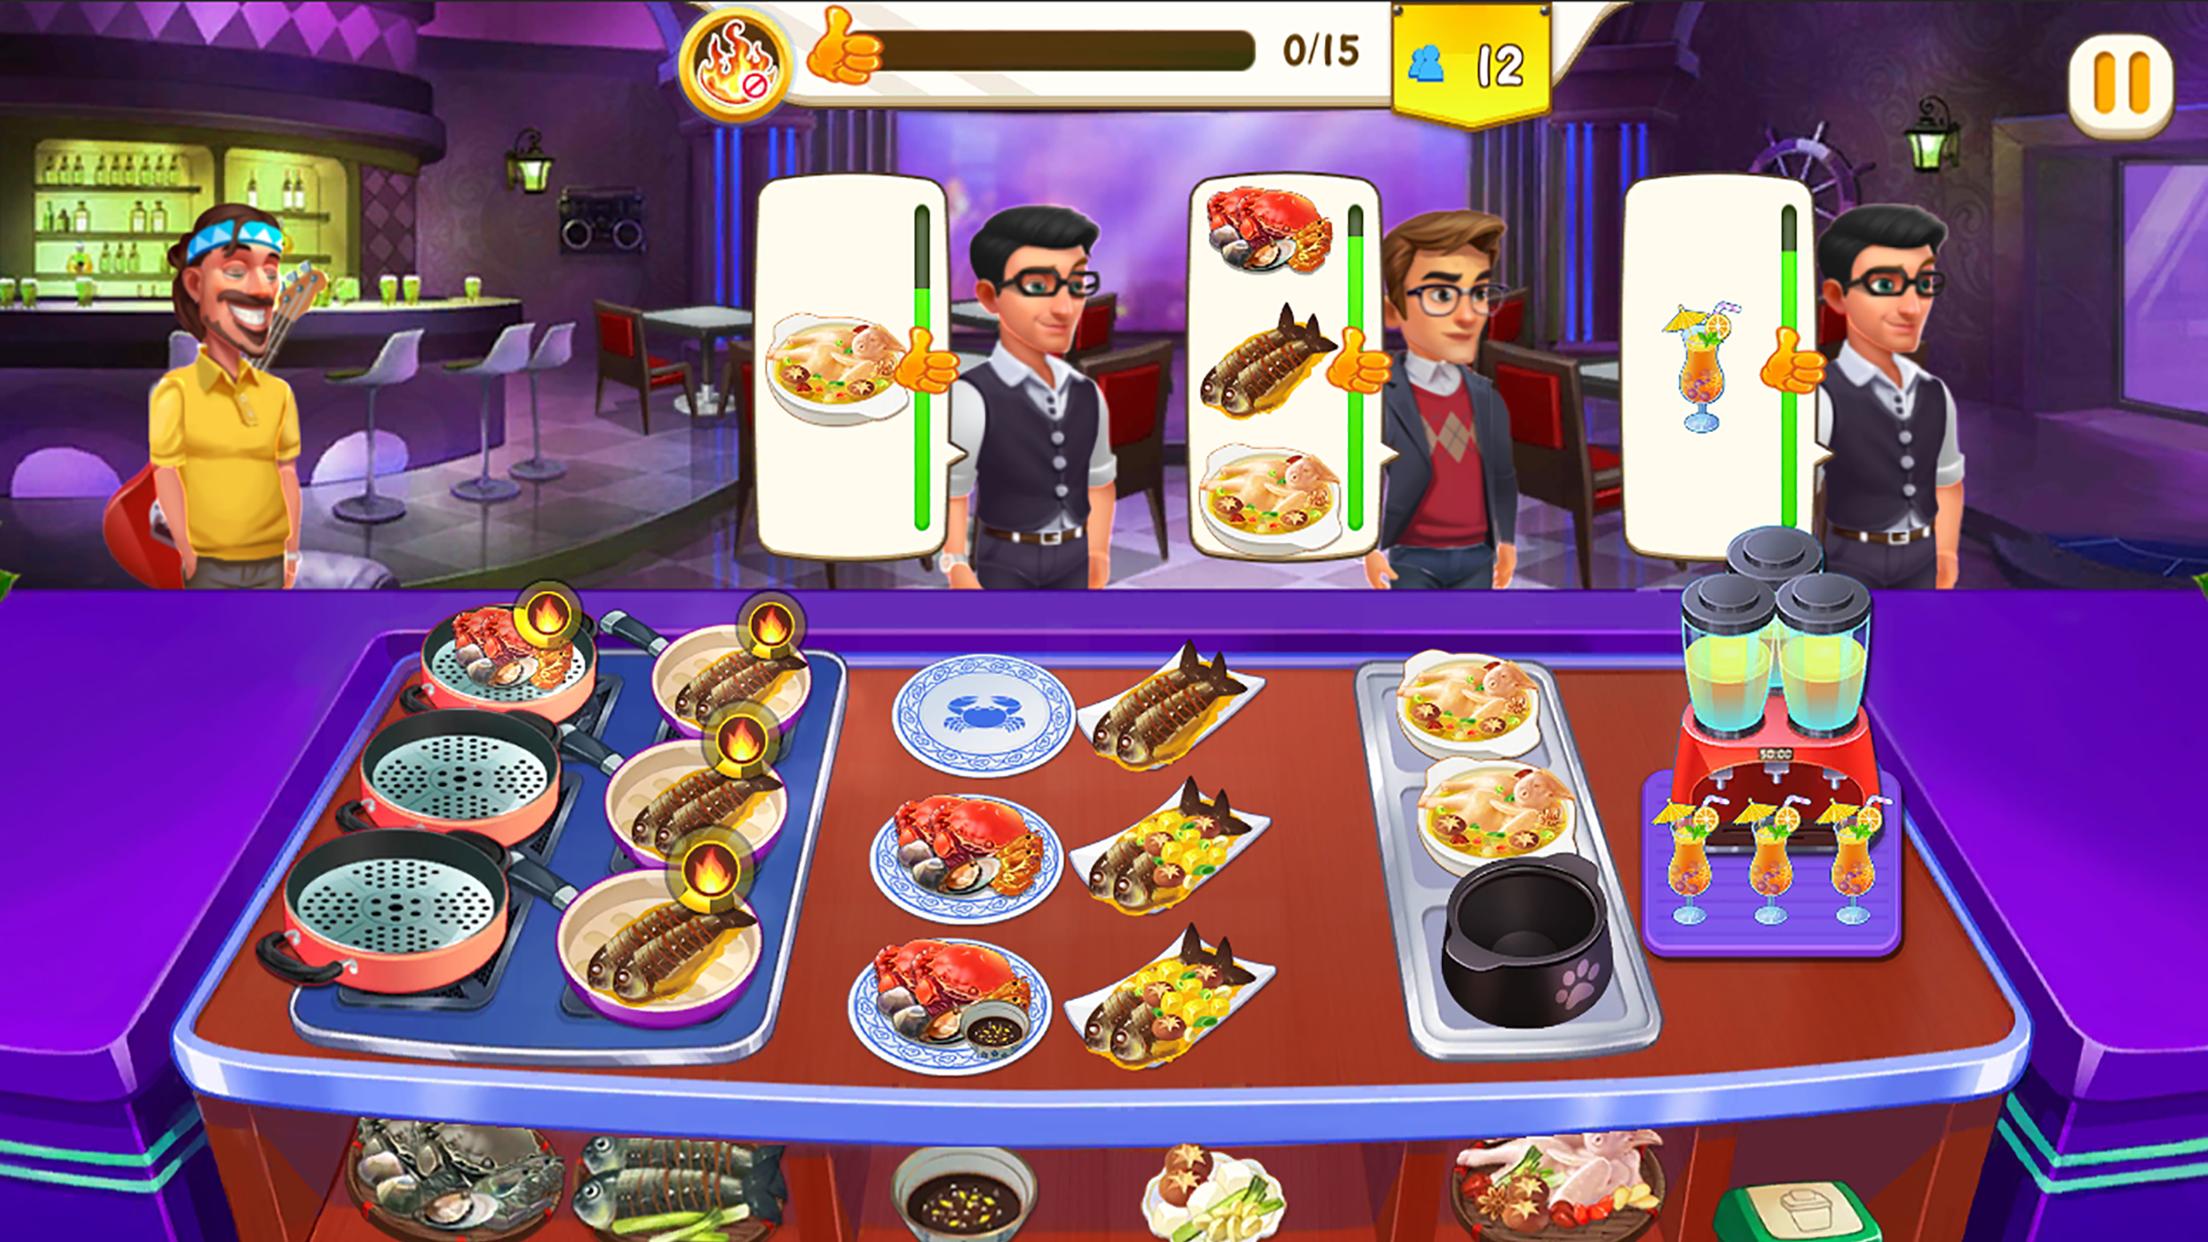 Cooking Rush Bake it to delicious 2.1.2 Screenshot 11